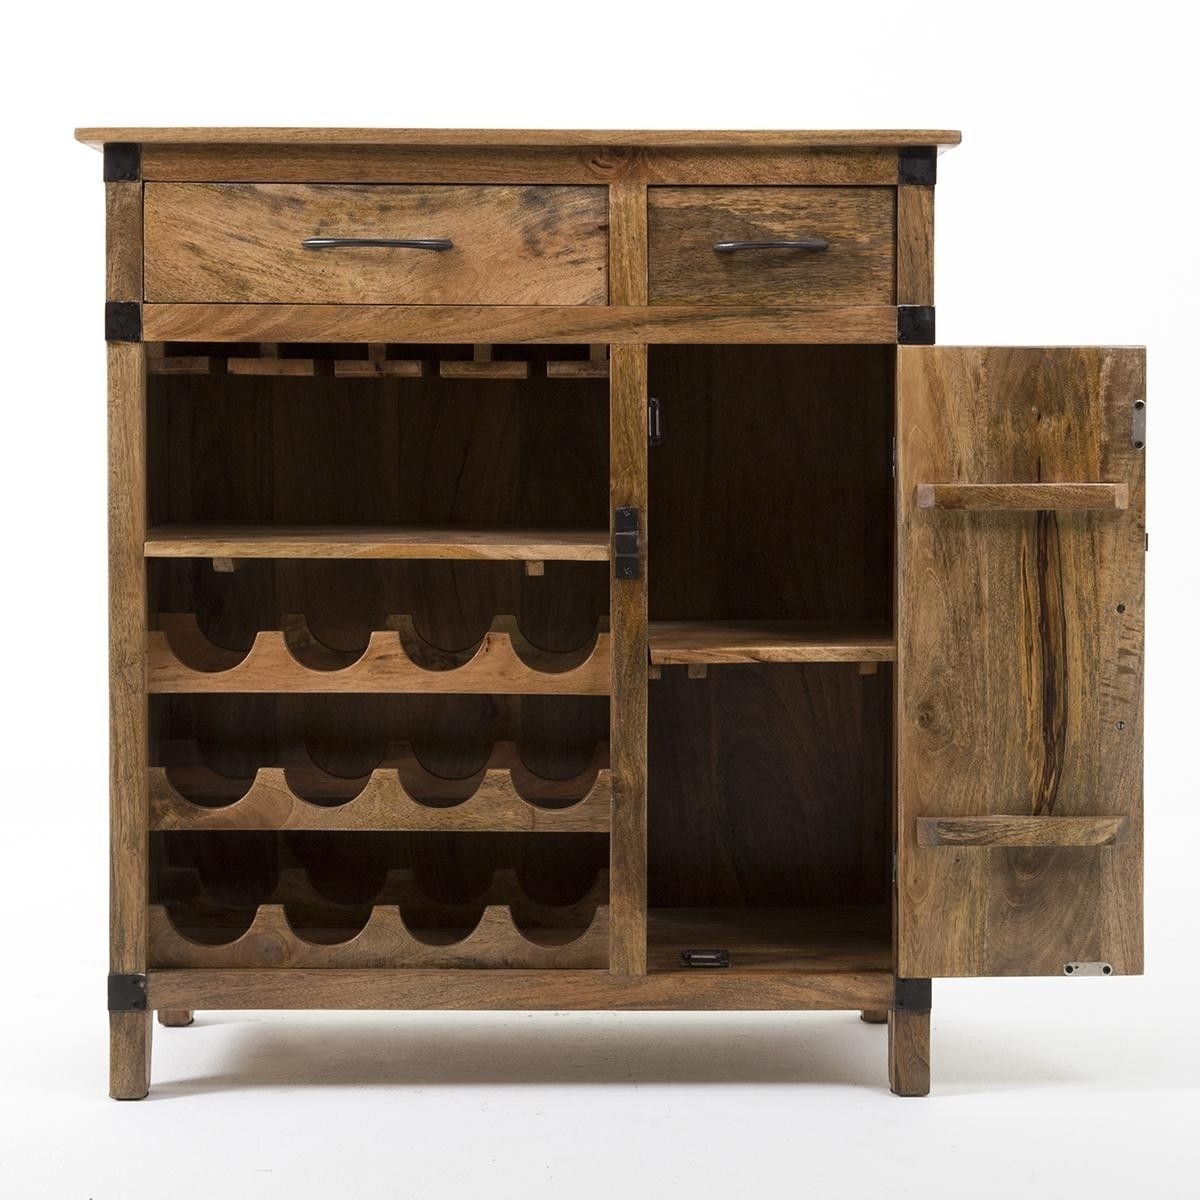 Rustic industrial wine cabinet with images wine